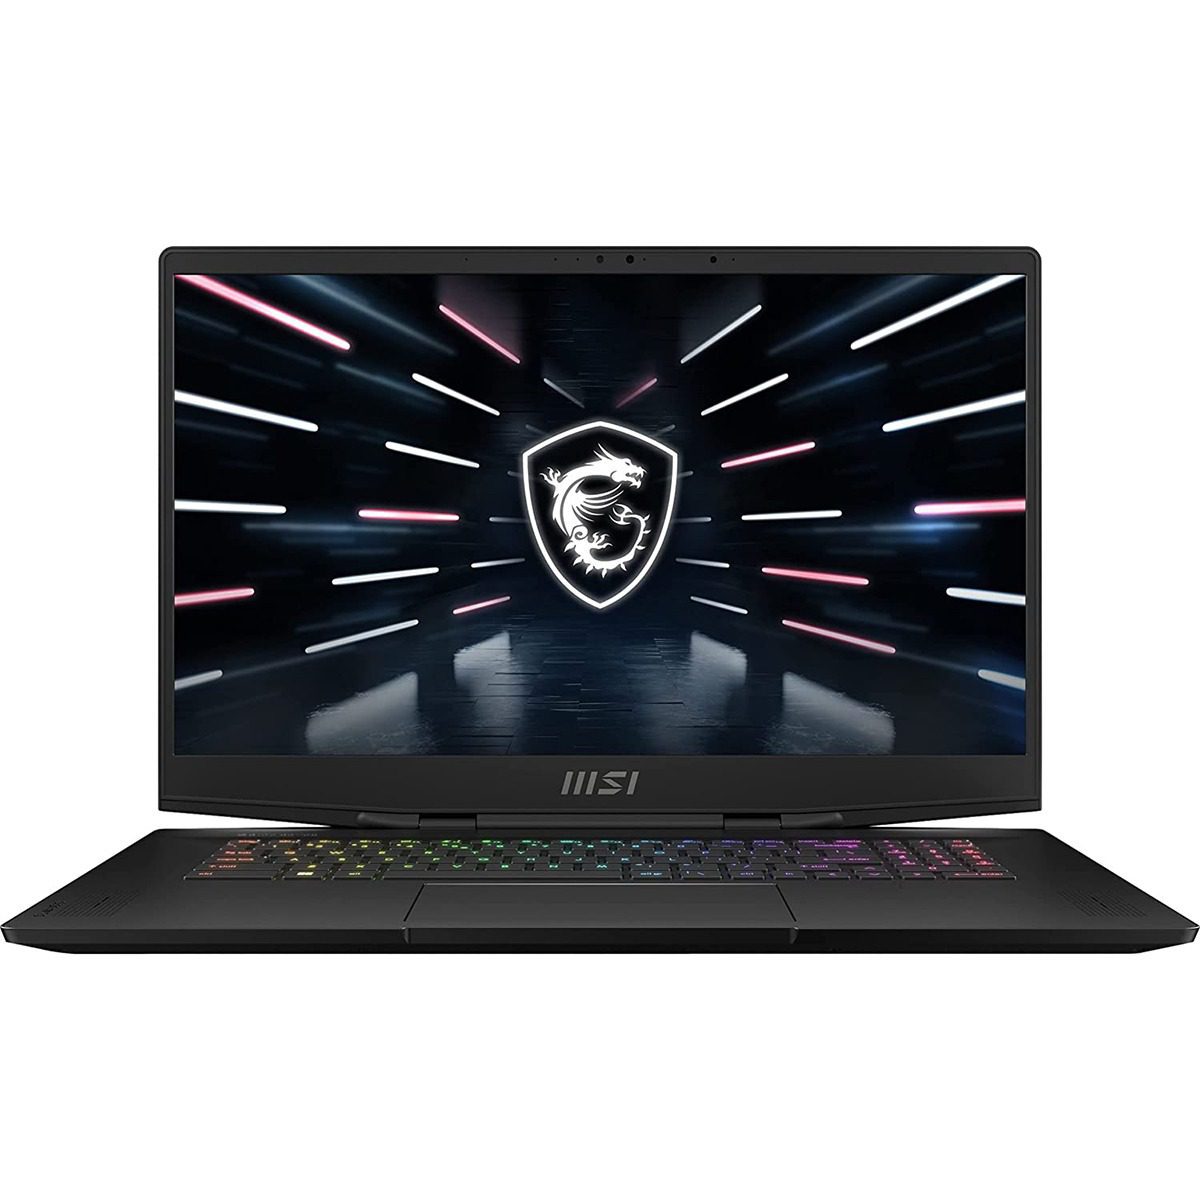 MSI Stealth GS77 12UE: A High-Performance Gaming Laptop for Ultimate Gamers